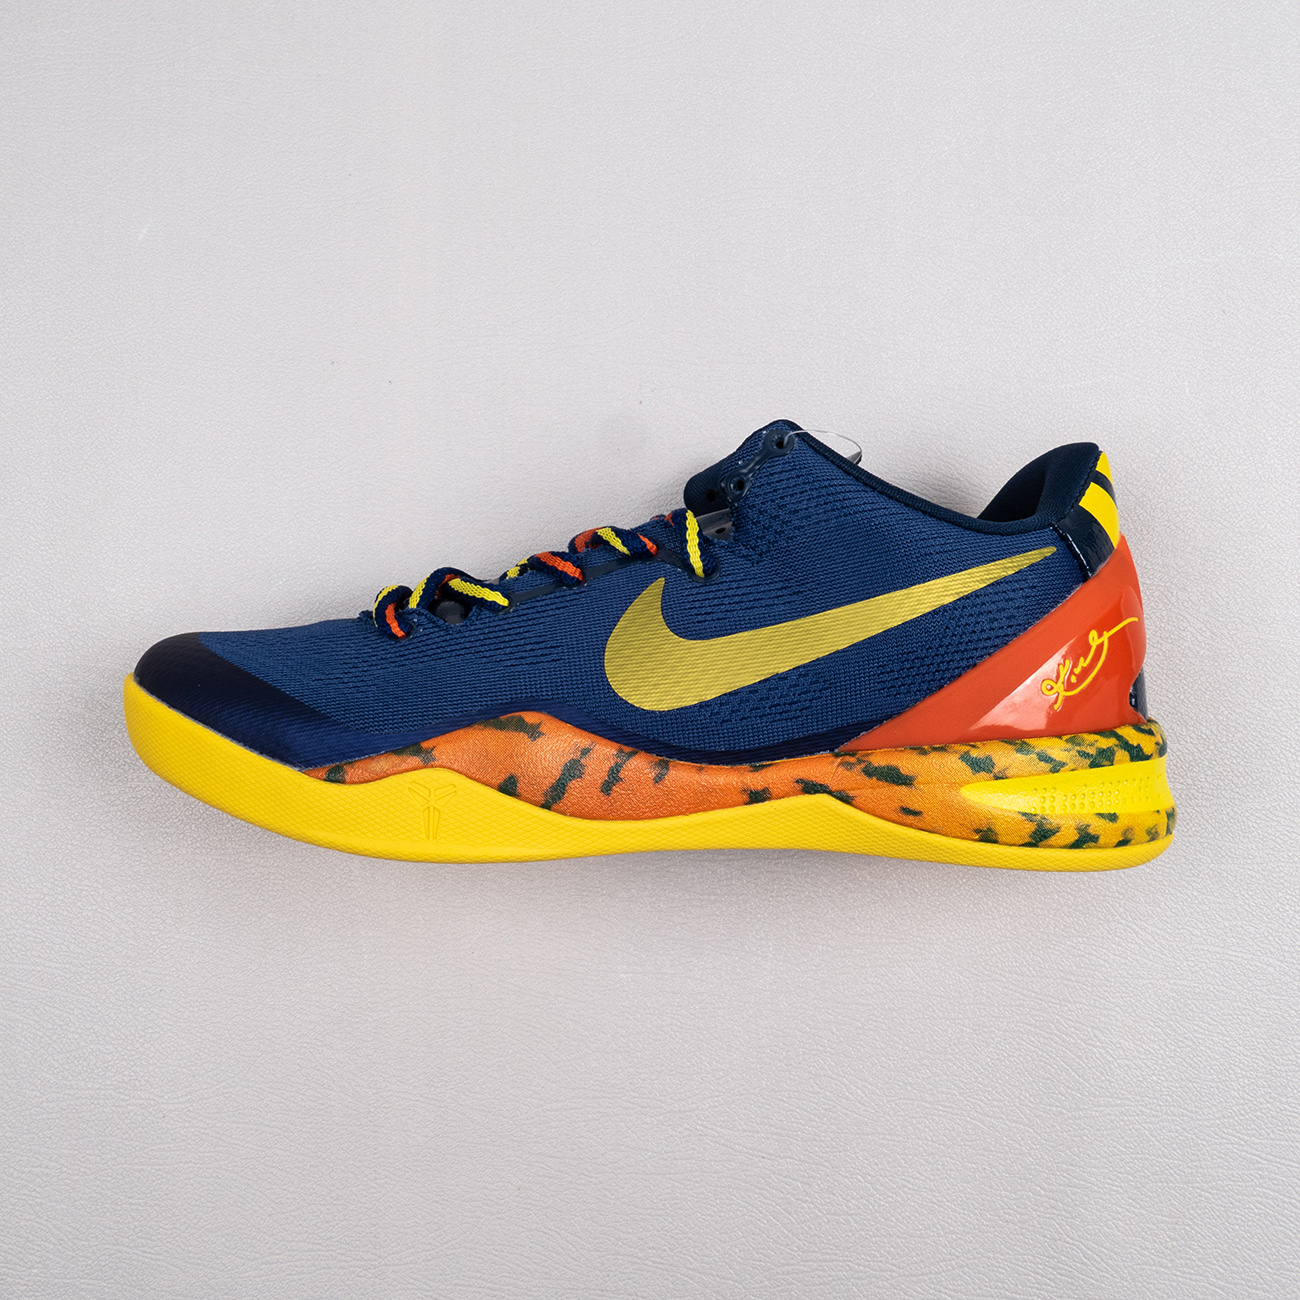 As well accent Cut Nike Kobe 8 System 'Barcelona' Deep Royal/Team Orange 555035-402 – Fit  Sporting Goods